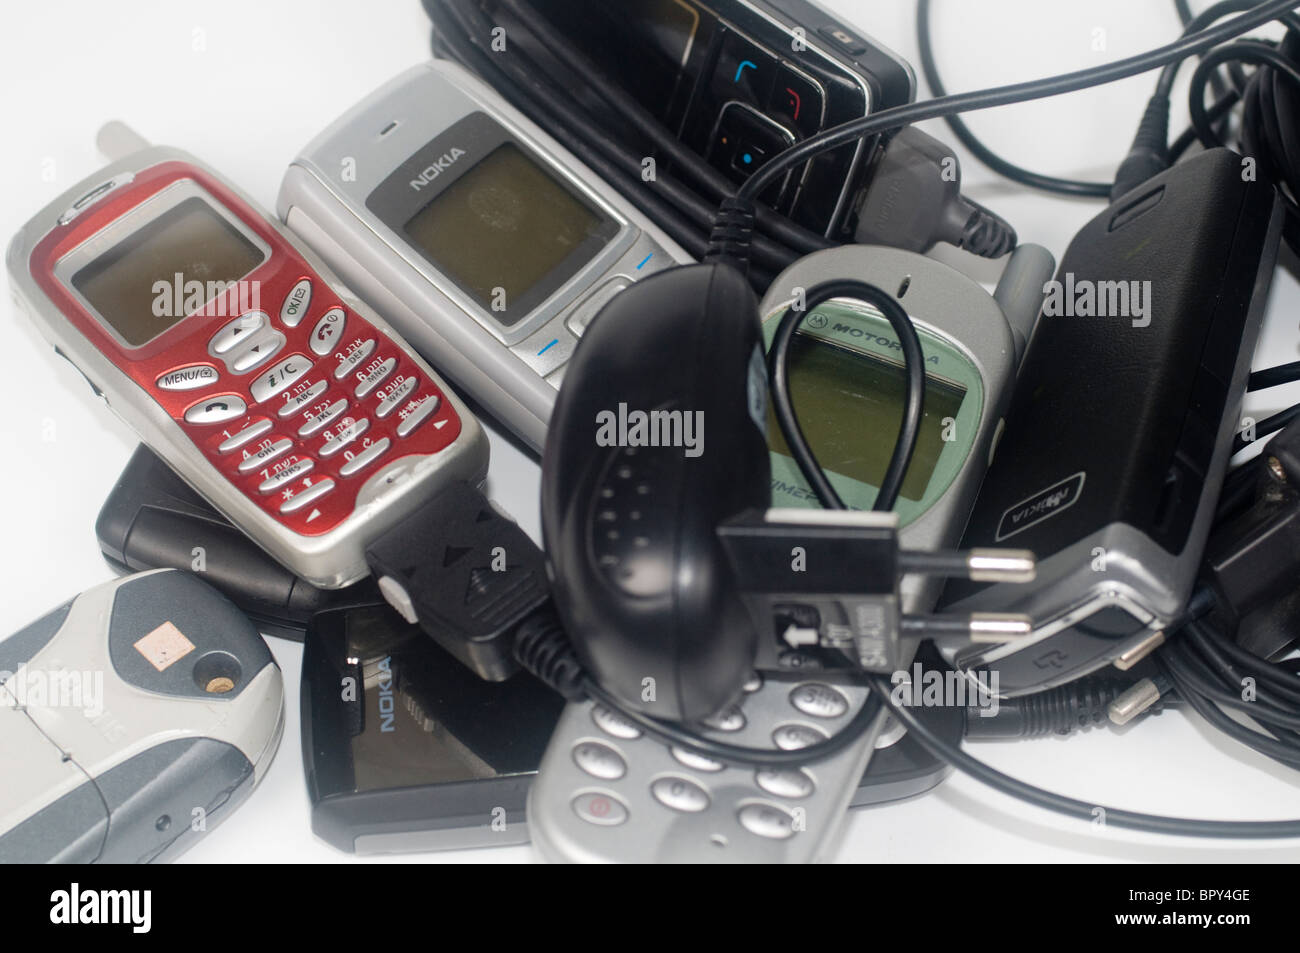 A pile of old disused mobile phones and chargers Stock Photo